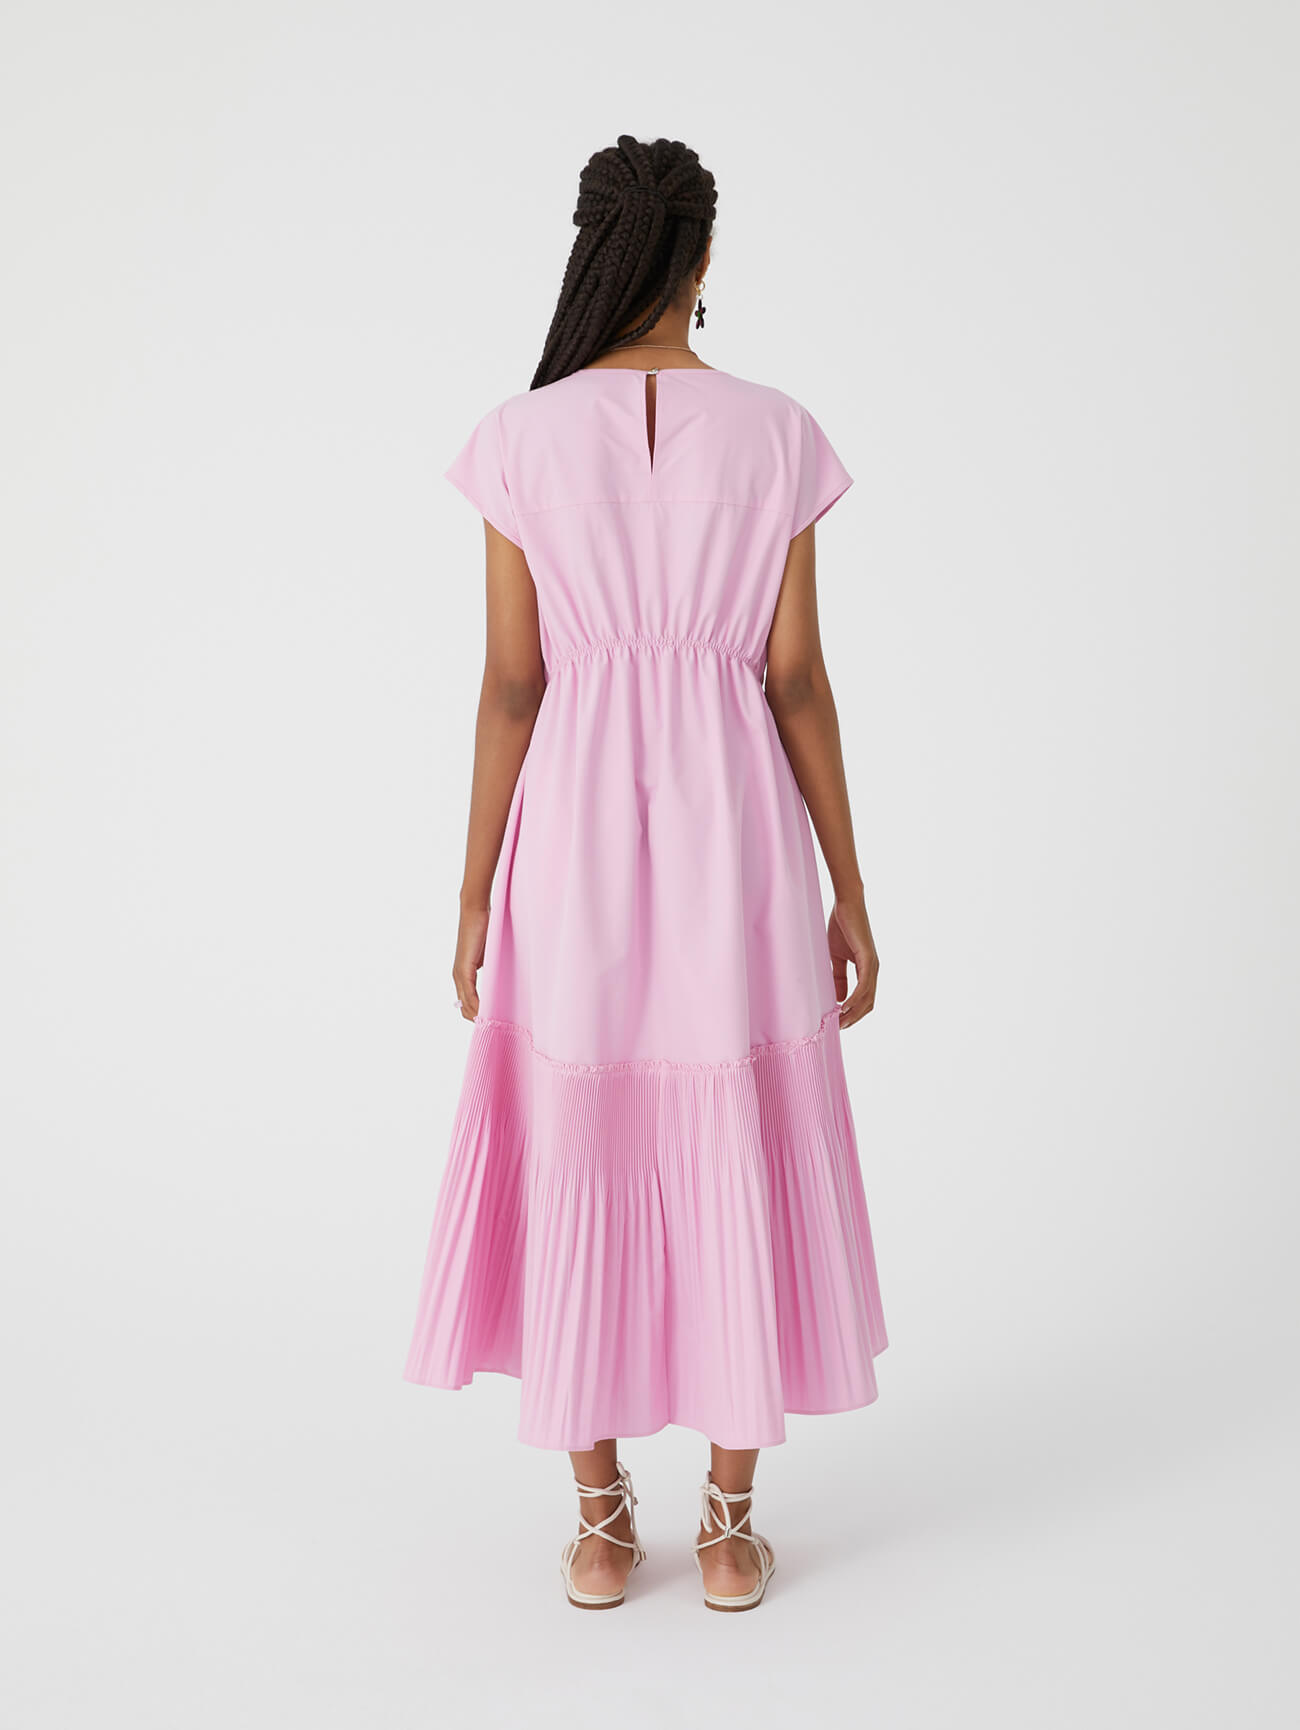 pink dress with ruffles on the bottom